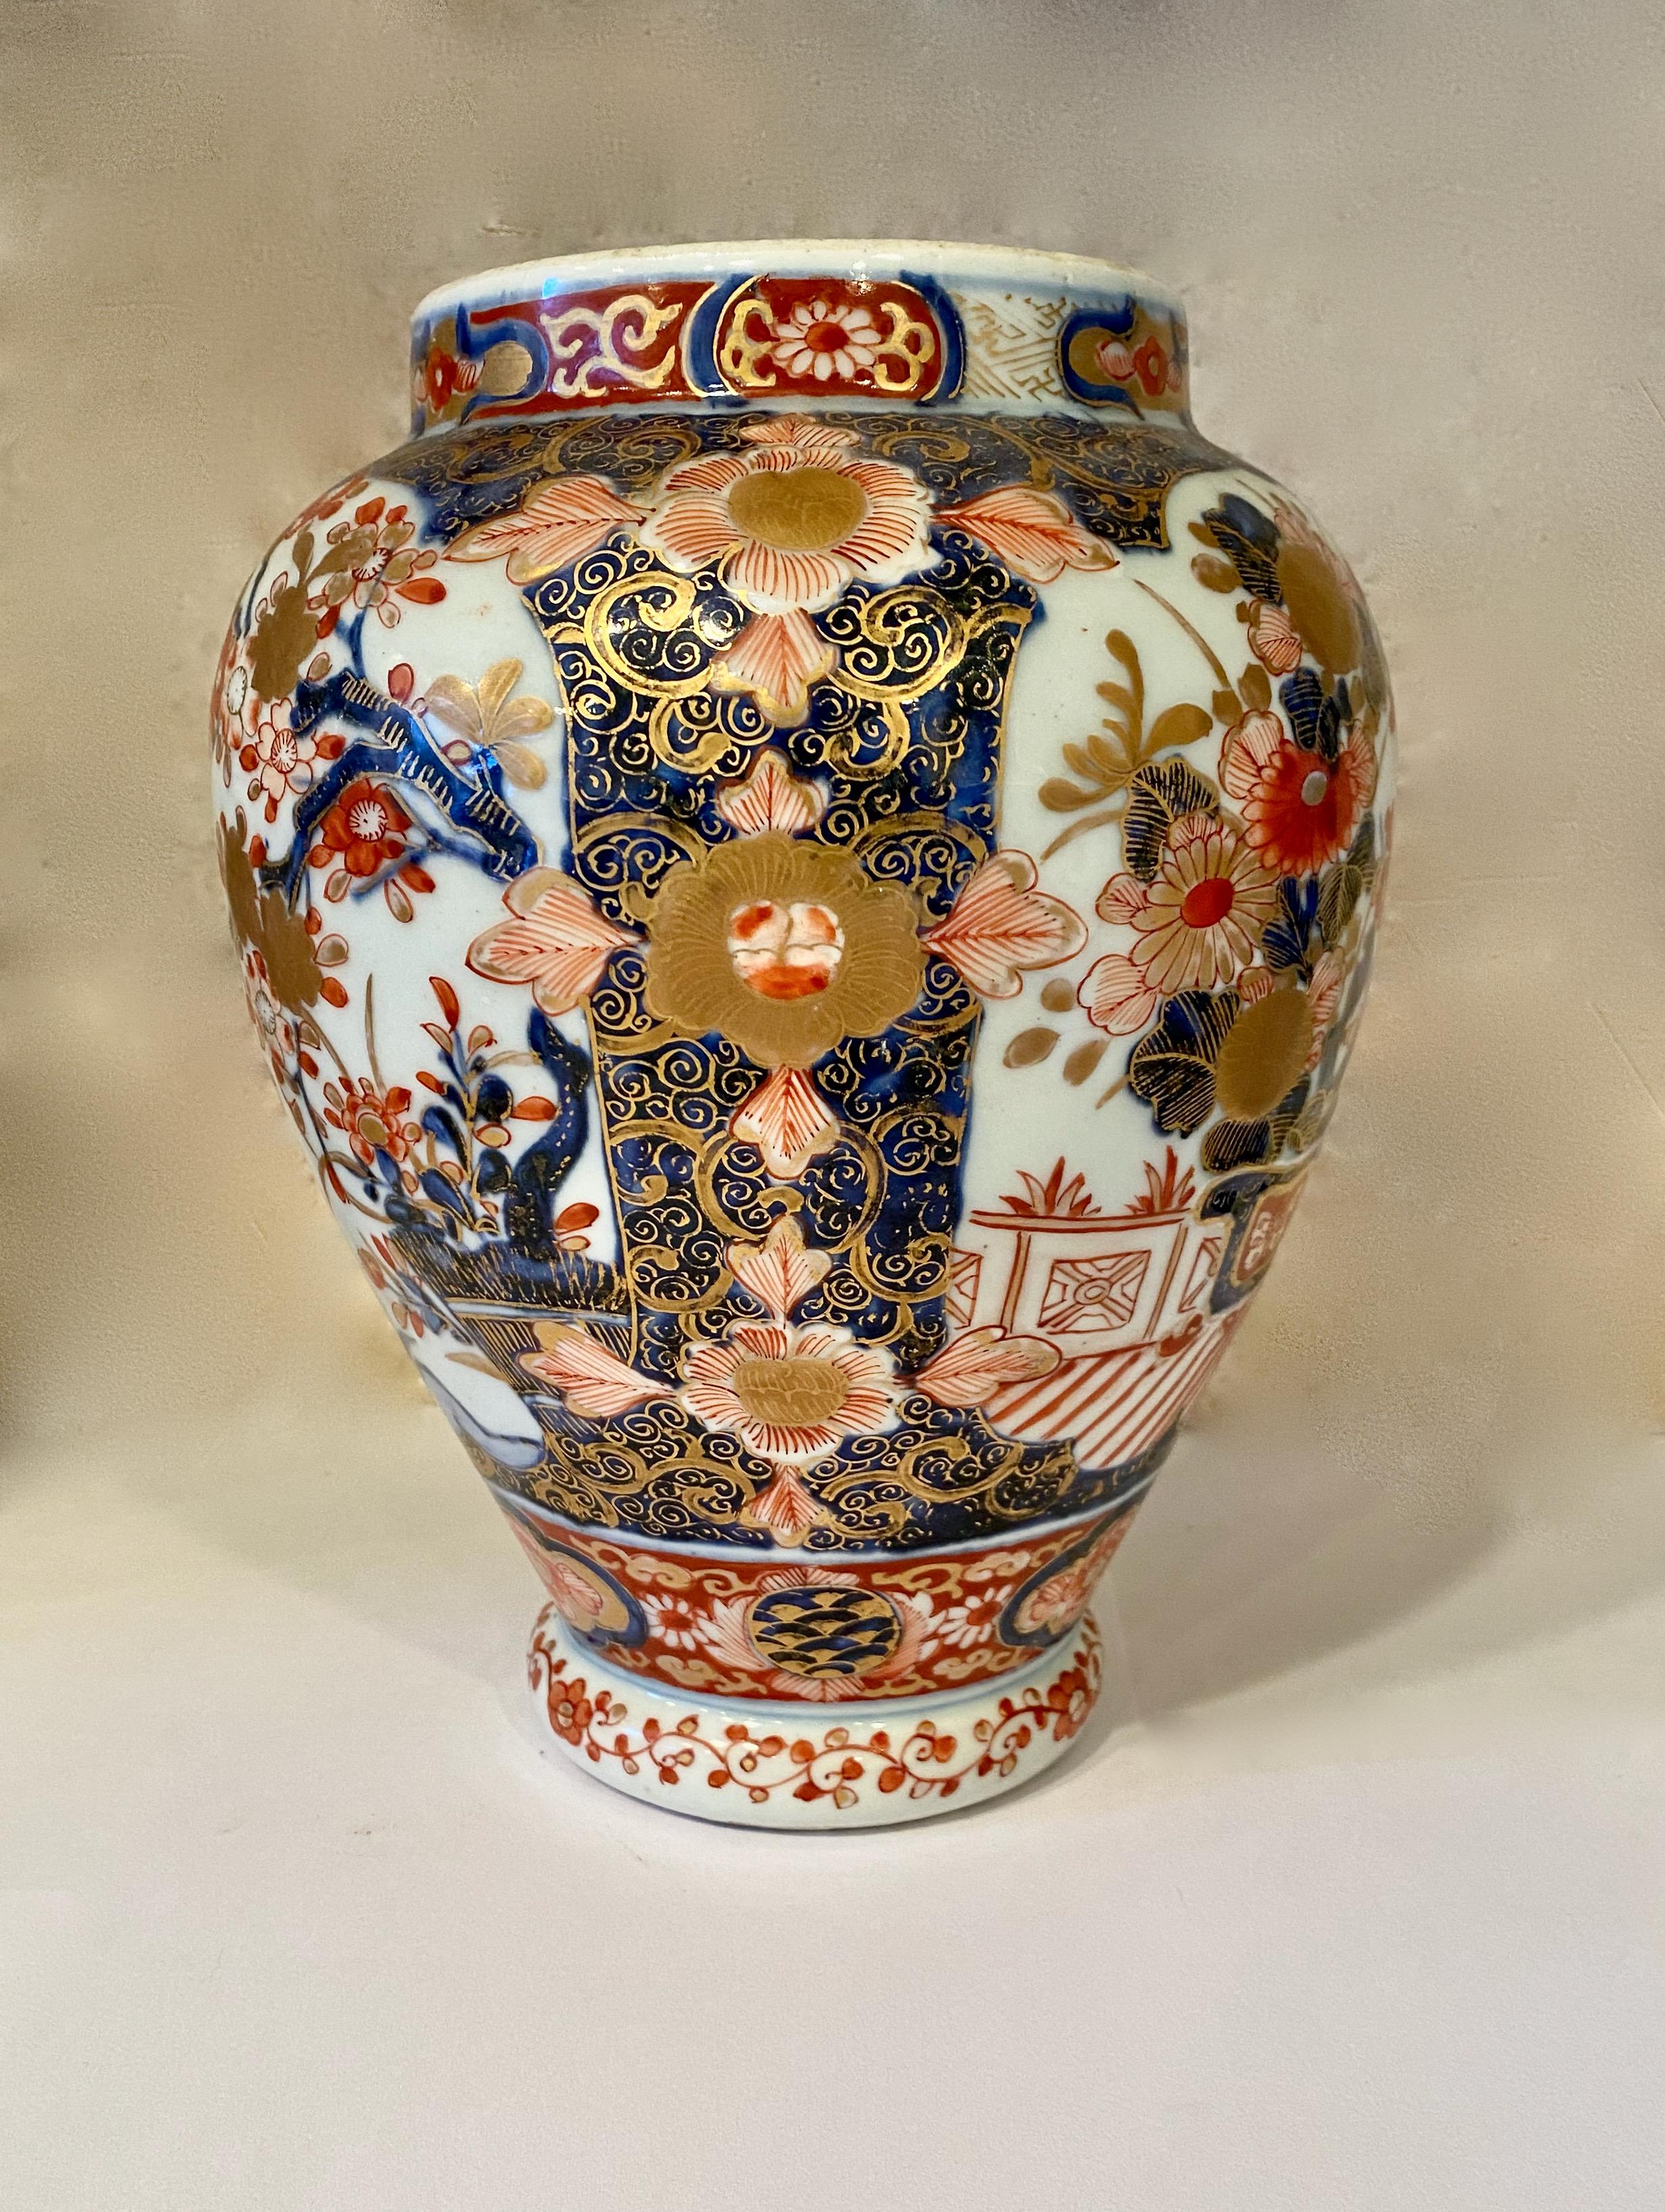 This is a beautifully detailed small Imari vase that is decorated in traditional Japanese elements such as plum blossoms, flower baskets, ho-ho or phoenix birds. The vase is further highlighted in gold leaf. The vase is in overall very good